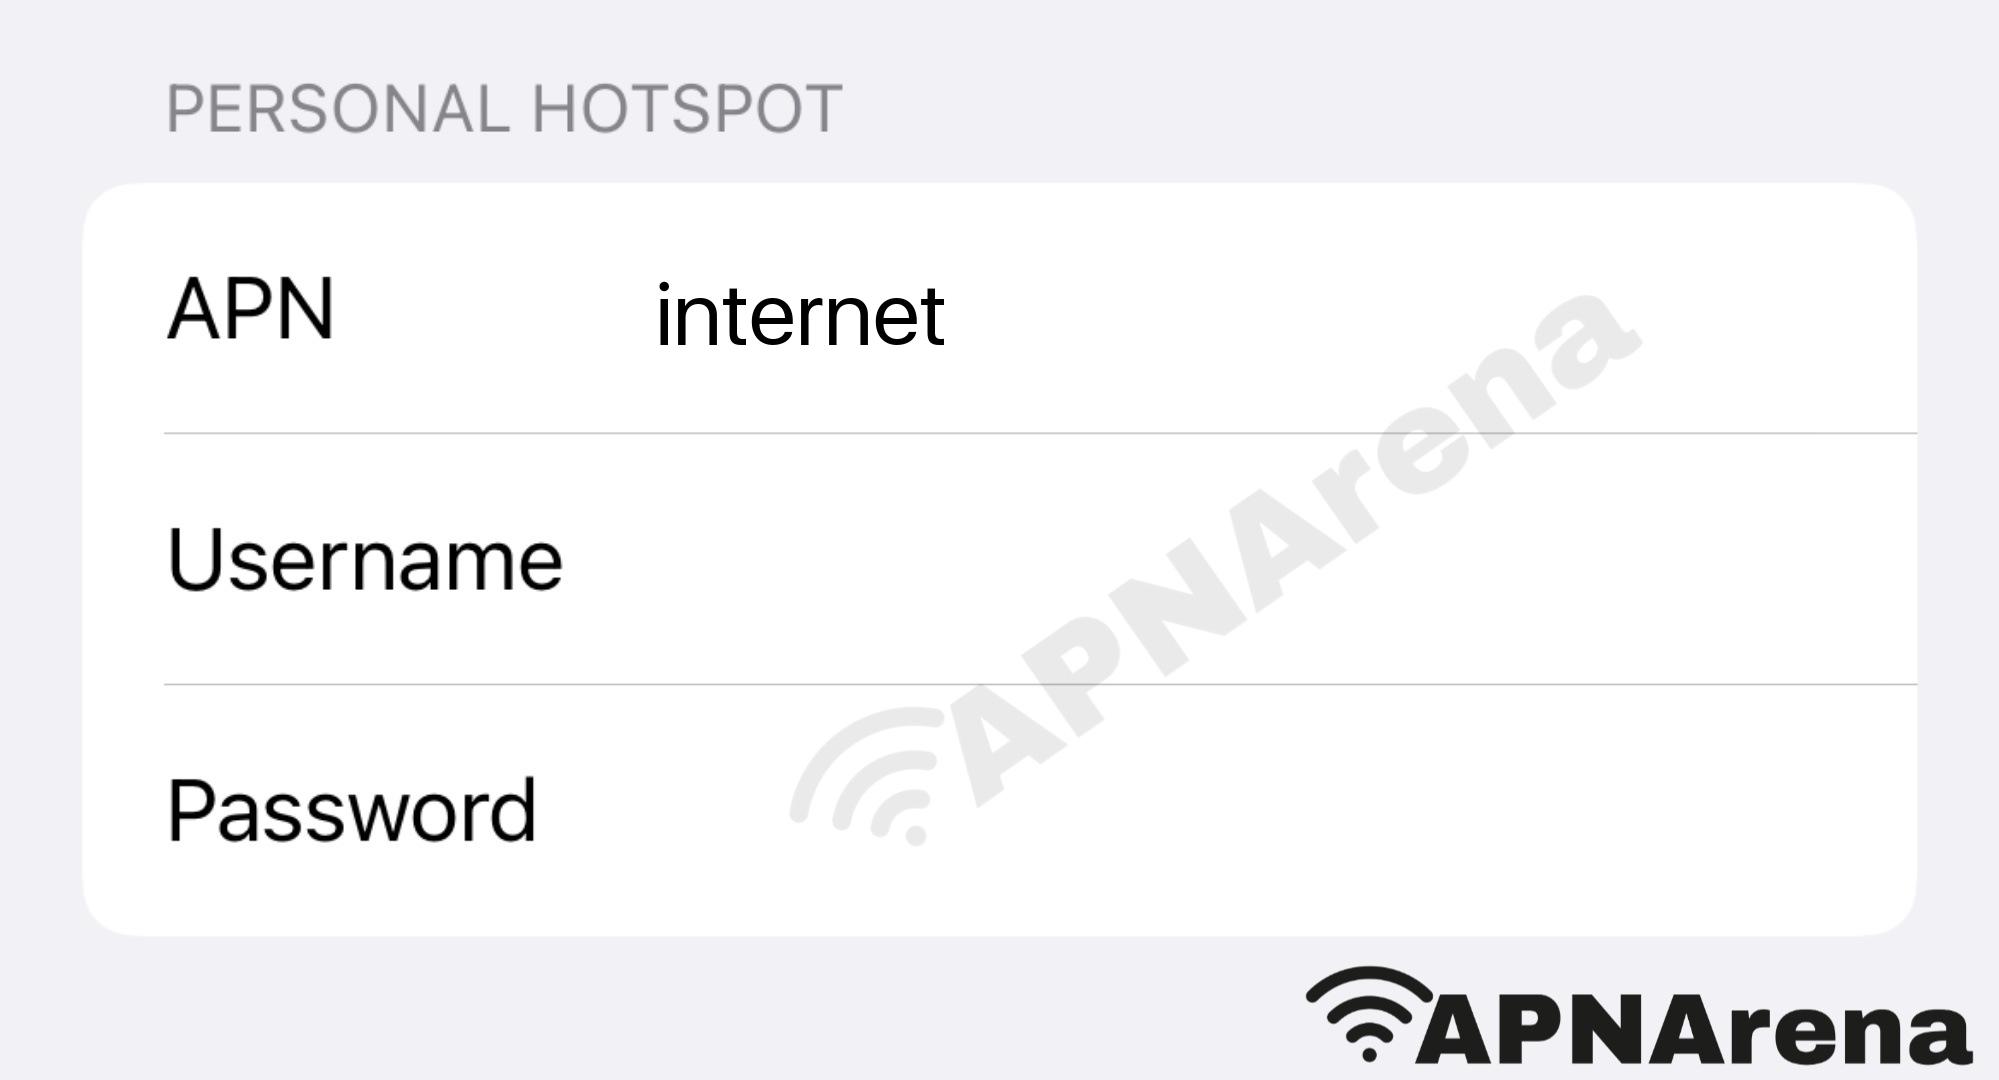 Coles Mobile Personal Hotspot Settings for iPhone